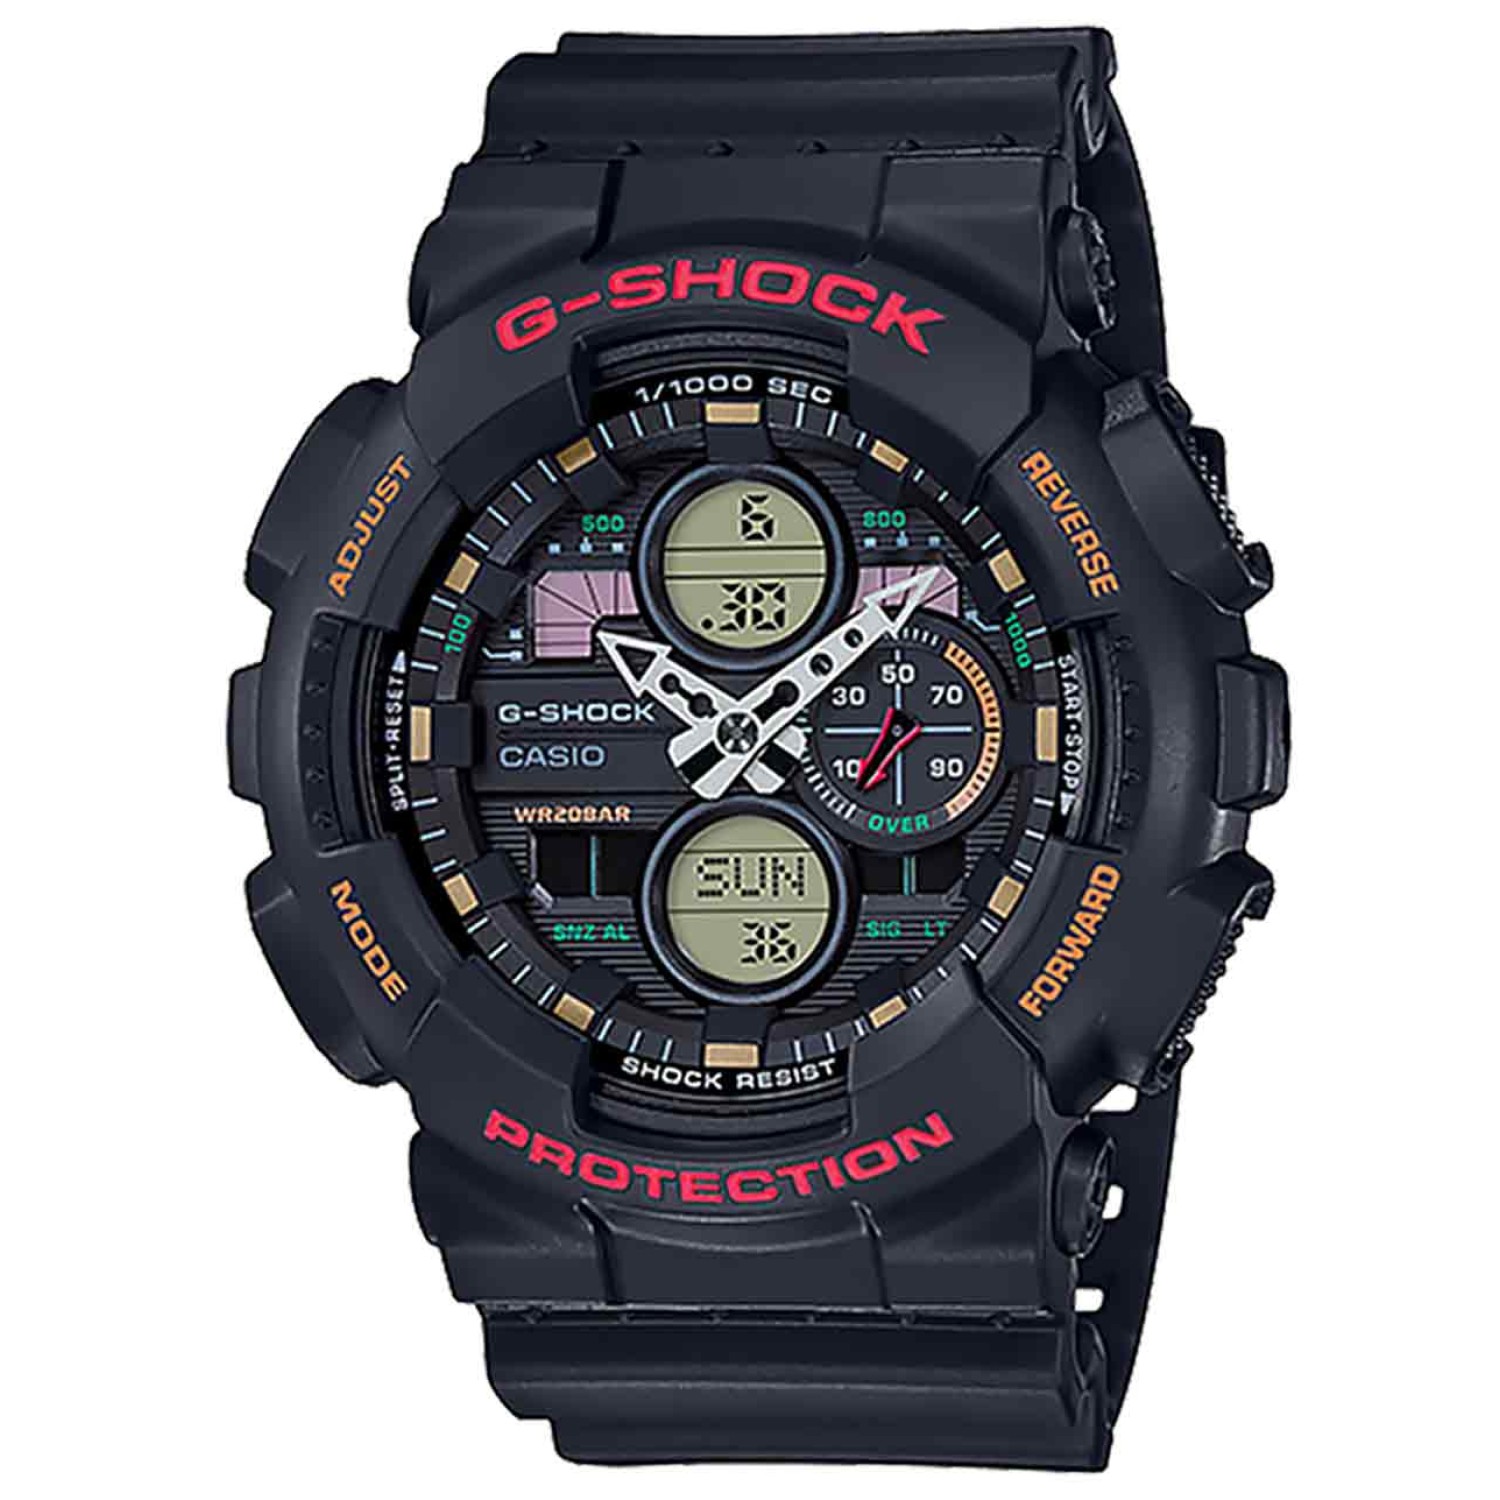 GA140-1A4 G-SHOCK Analog Digital Watch. G-SHOCK, the watch that has been setting the standard for timekeeping toughness since 1983, announces a new collection of analog-digital combination models based on the popular GA Series, but with new face and hand 